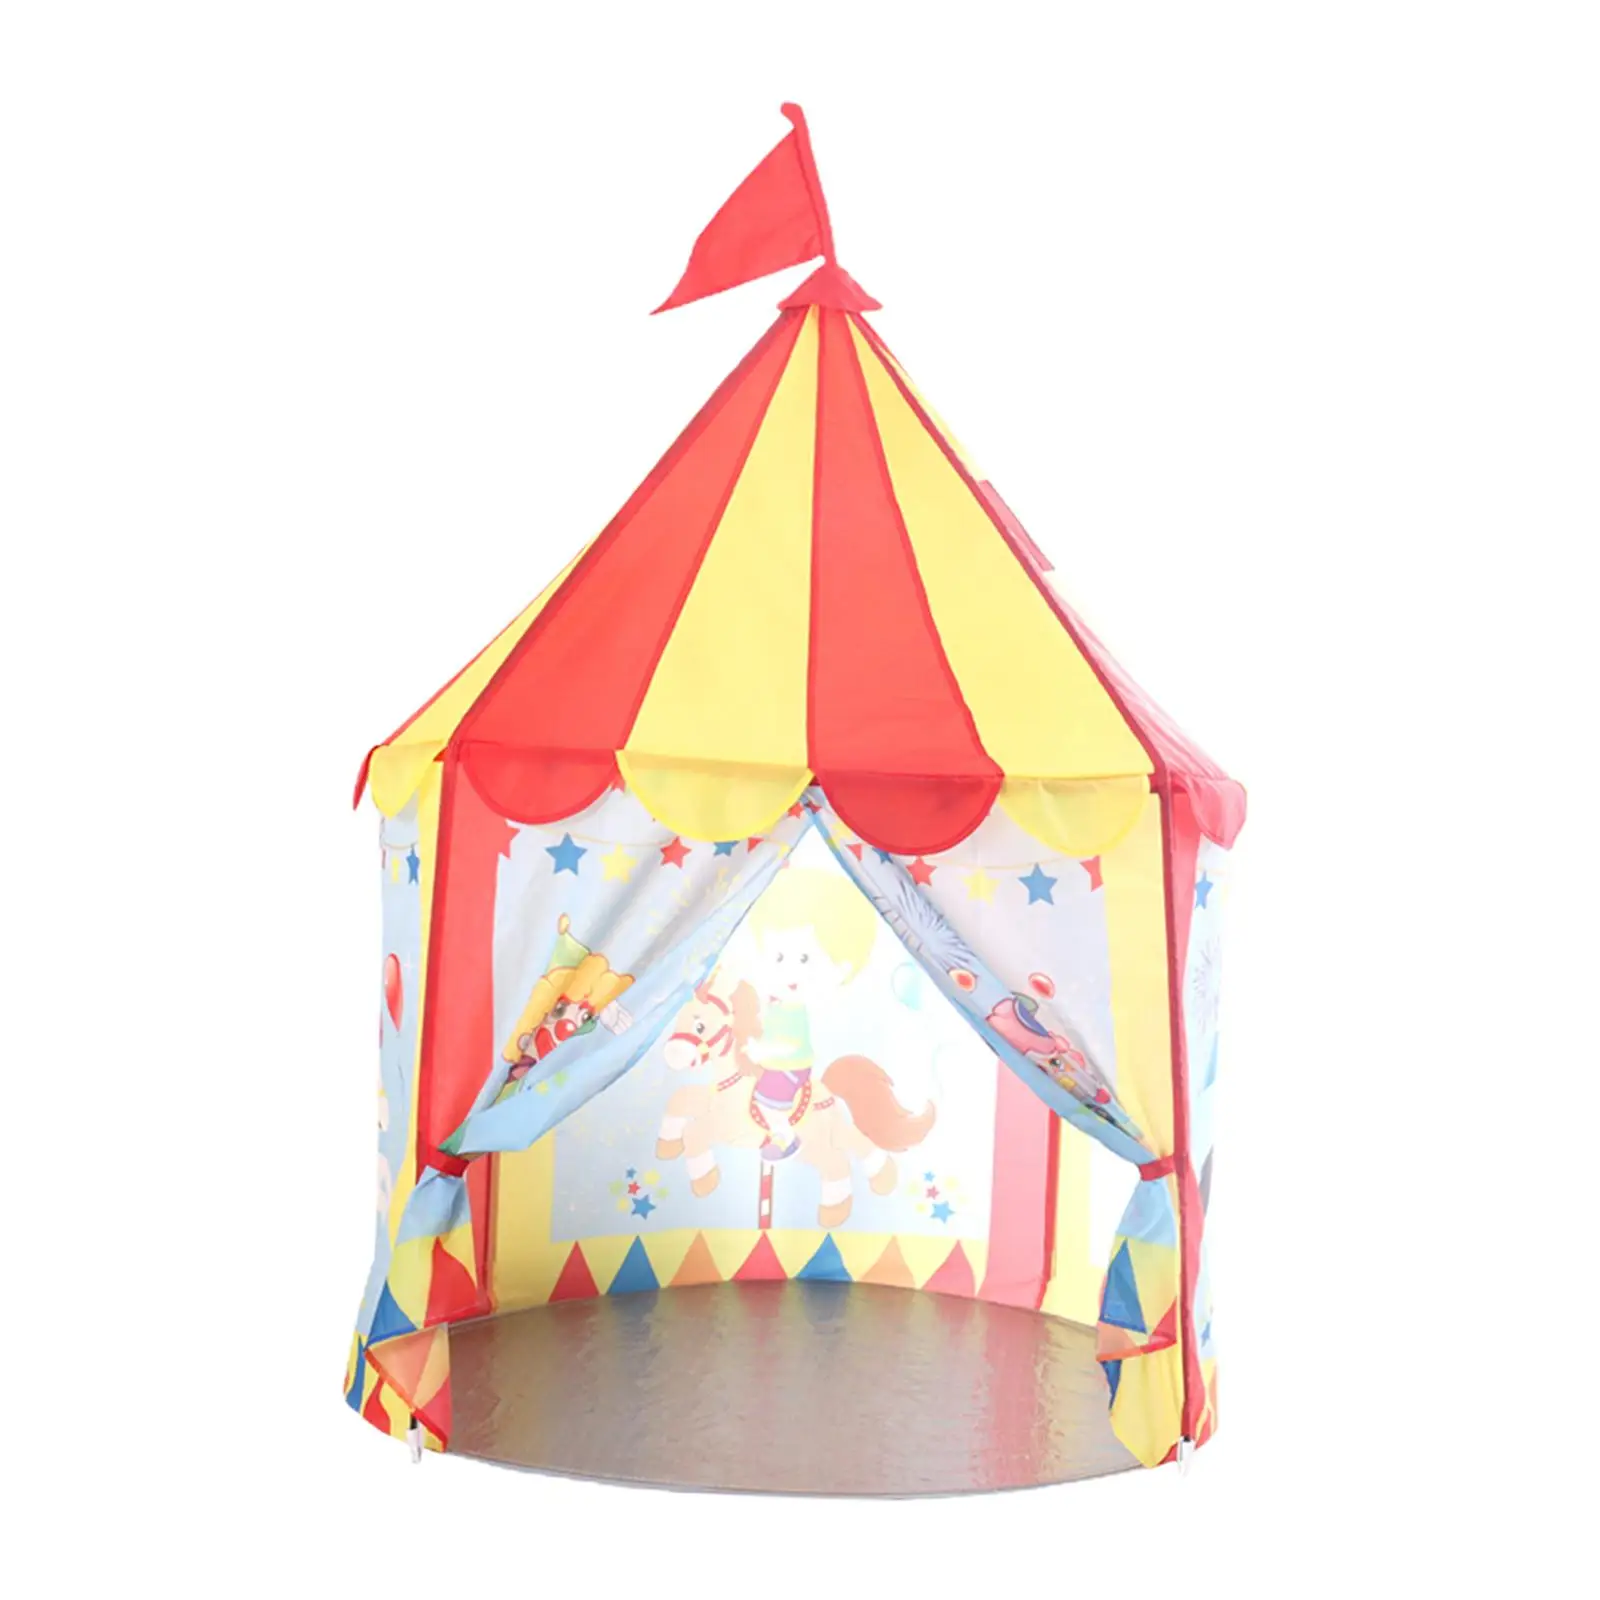 Prince Castle Tent Play Teepee Foldable Best Gift Portable Play Tent House Children Castle Playhous for garden Yard Baby